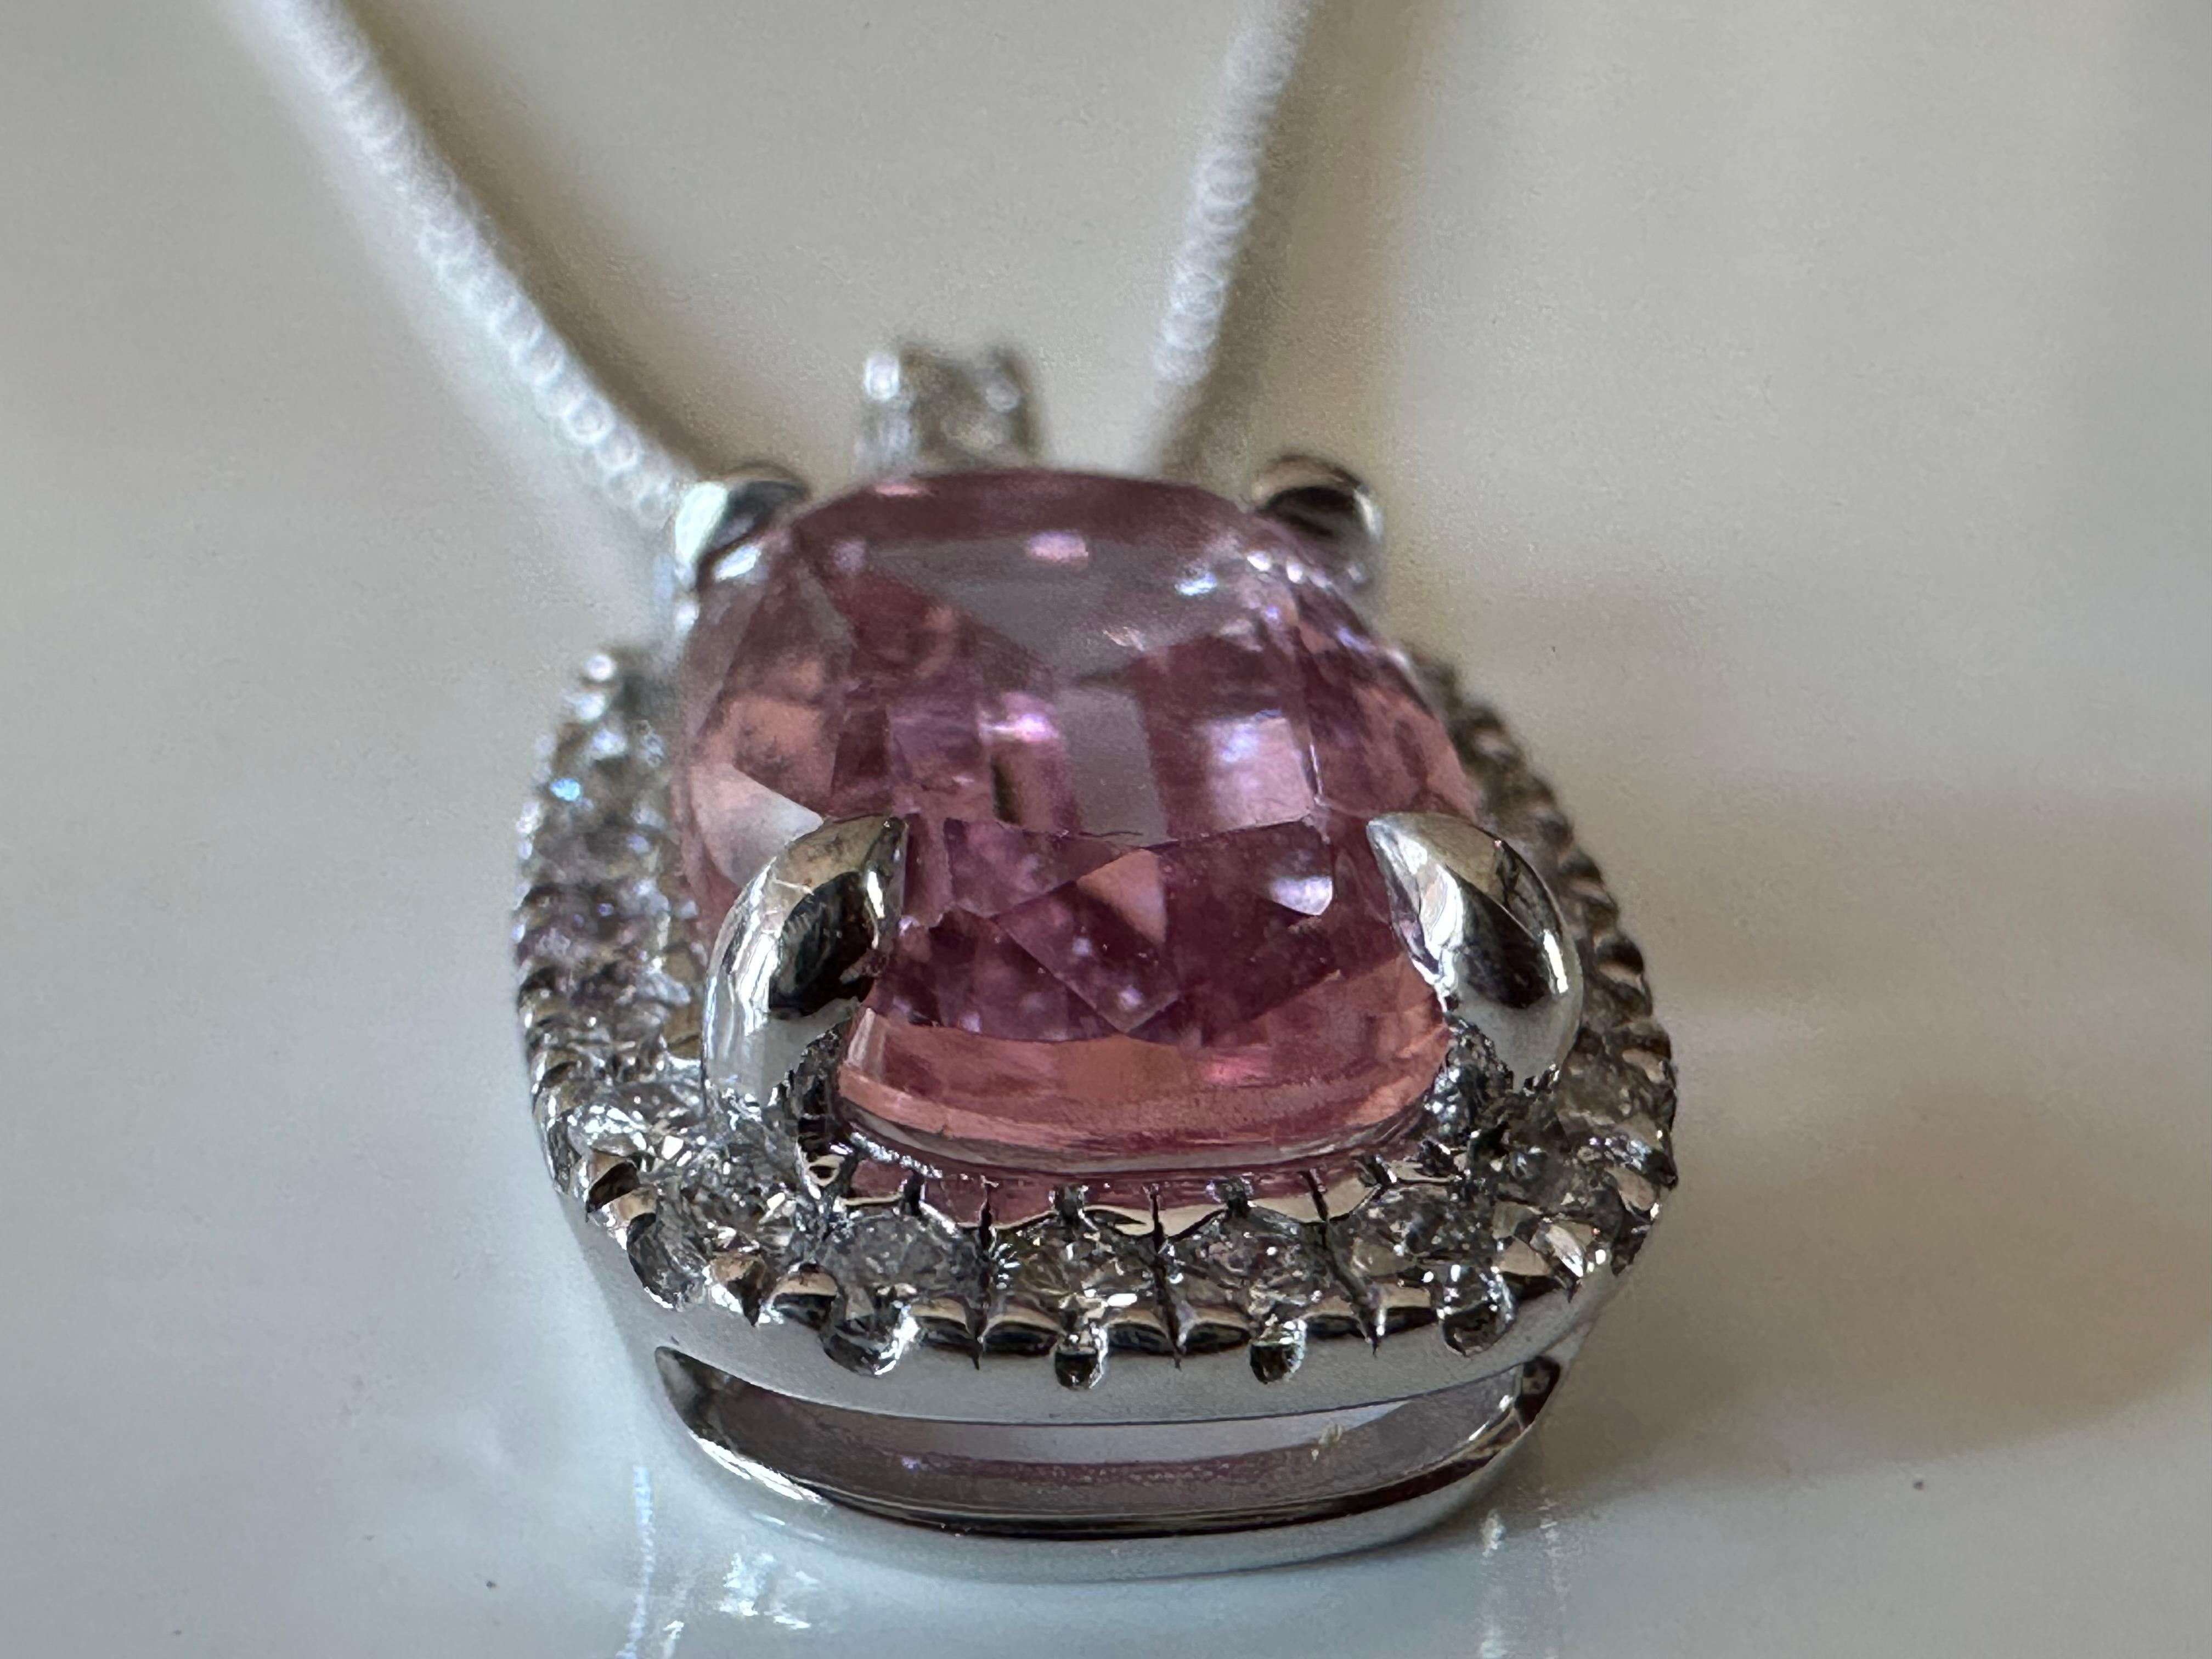 A 2.44-carat cushion-cut pink topaz centers this pendant necklace handcrafted in 14K white gold, surrounded by a halo of twenty-eight round diamonds, G color, SI1 clarity totaling 0.24 carats. The necklace measures 18 inches. 